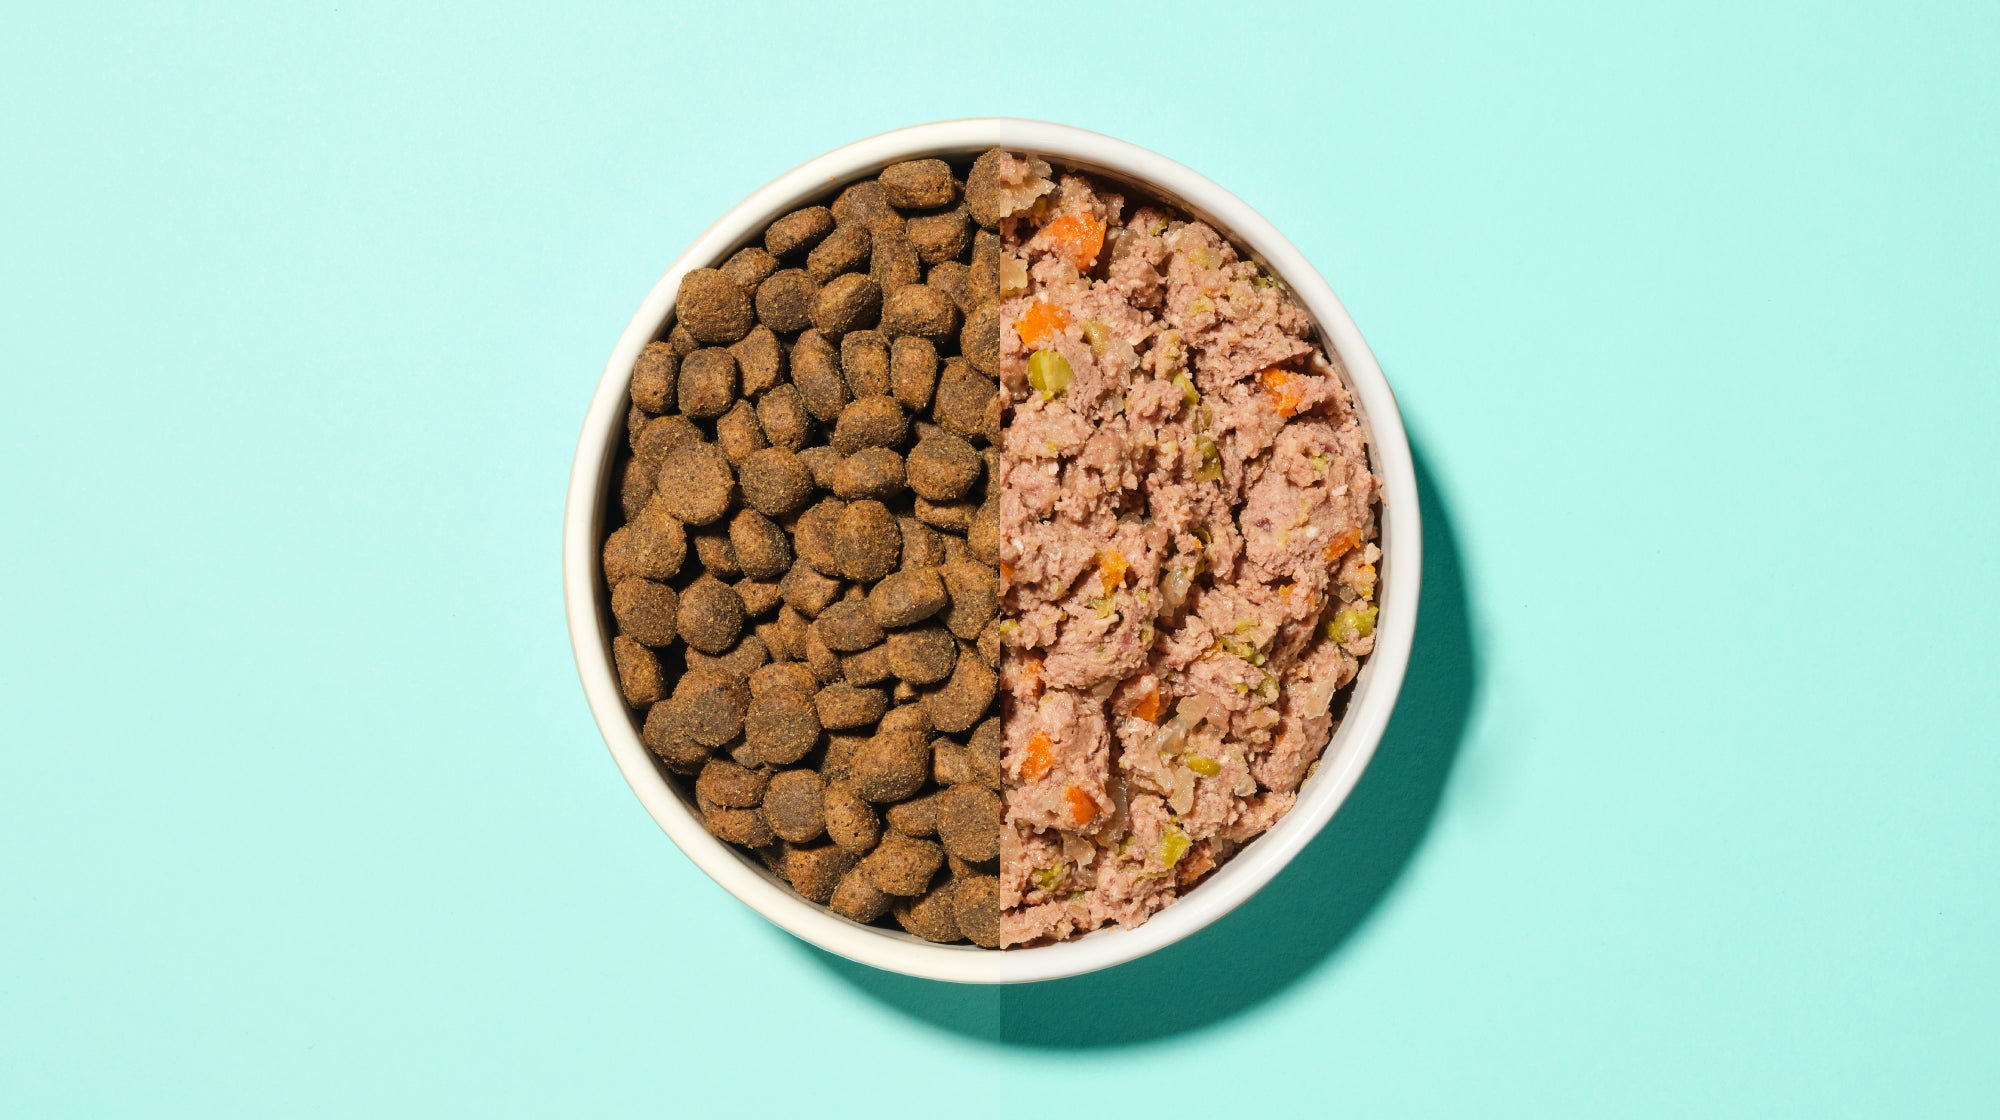 a dog bowl showing half wet food and half dry food on a blue background